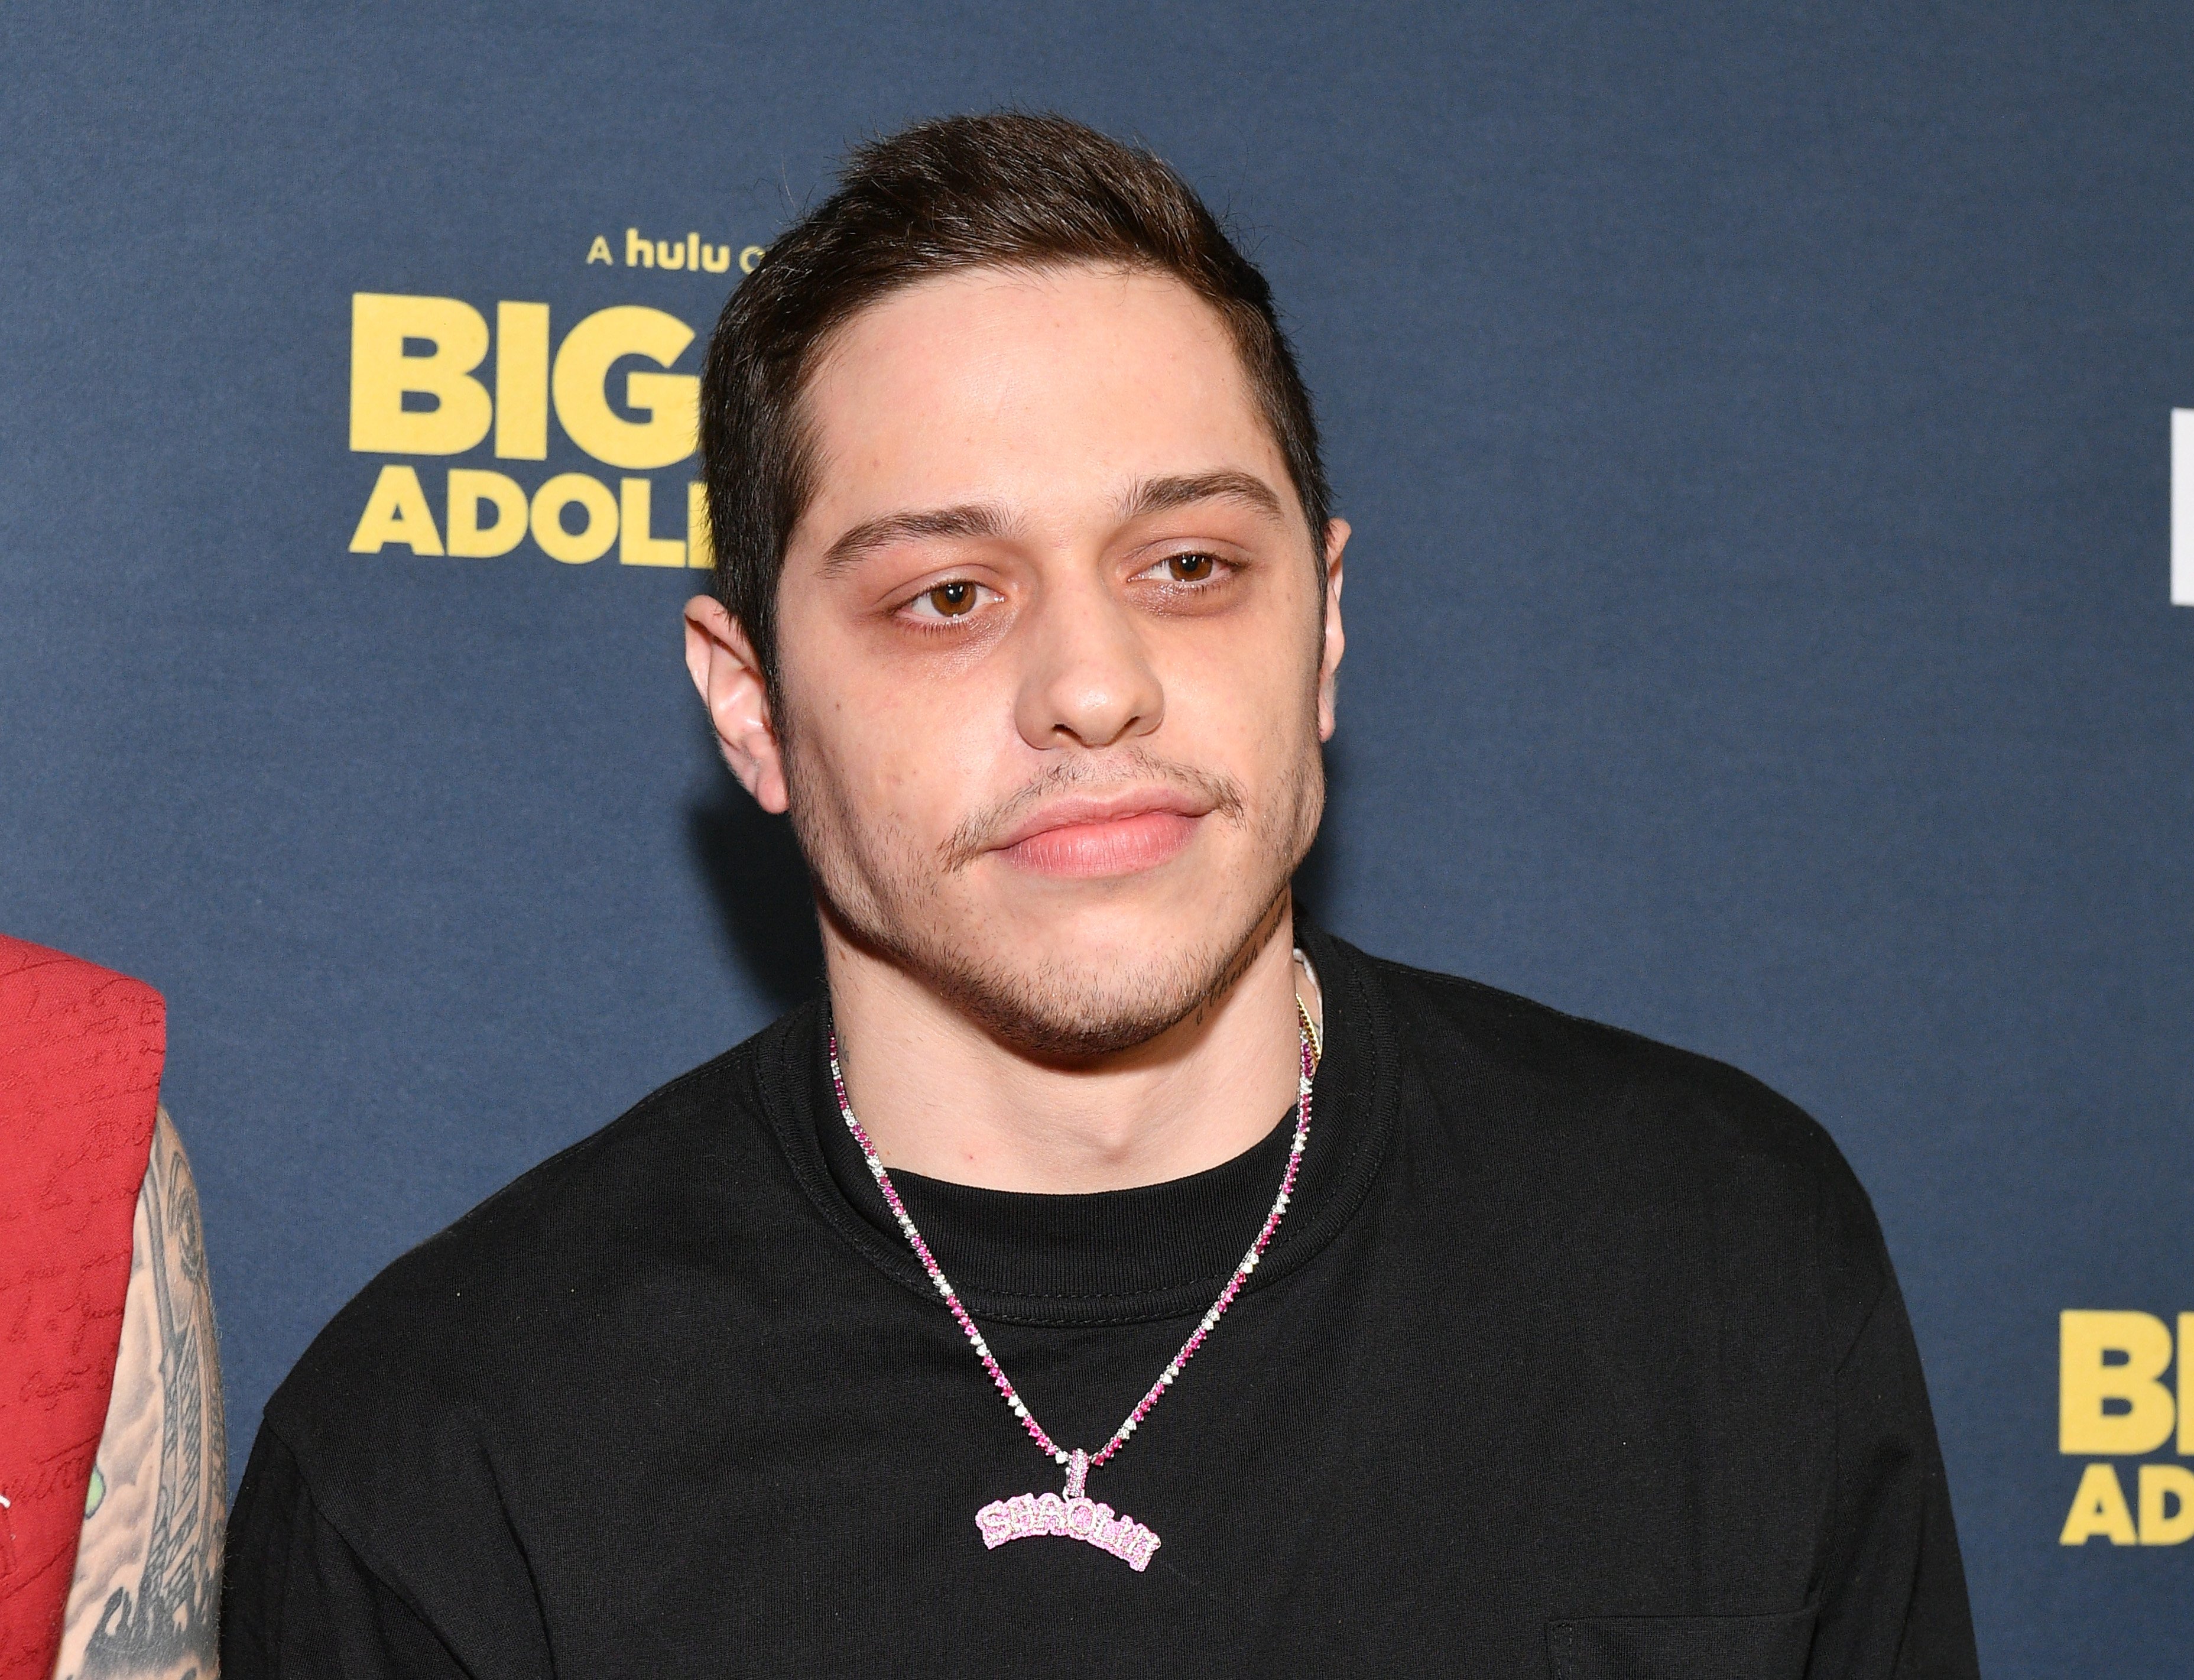 Pete Davidson attends the premiere of "Big Time Adolescence" at Metrograph on March 05, 2020 in New York City. | Source: Getty Images